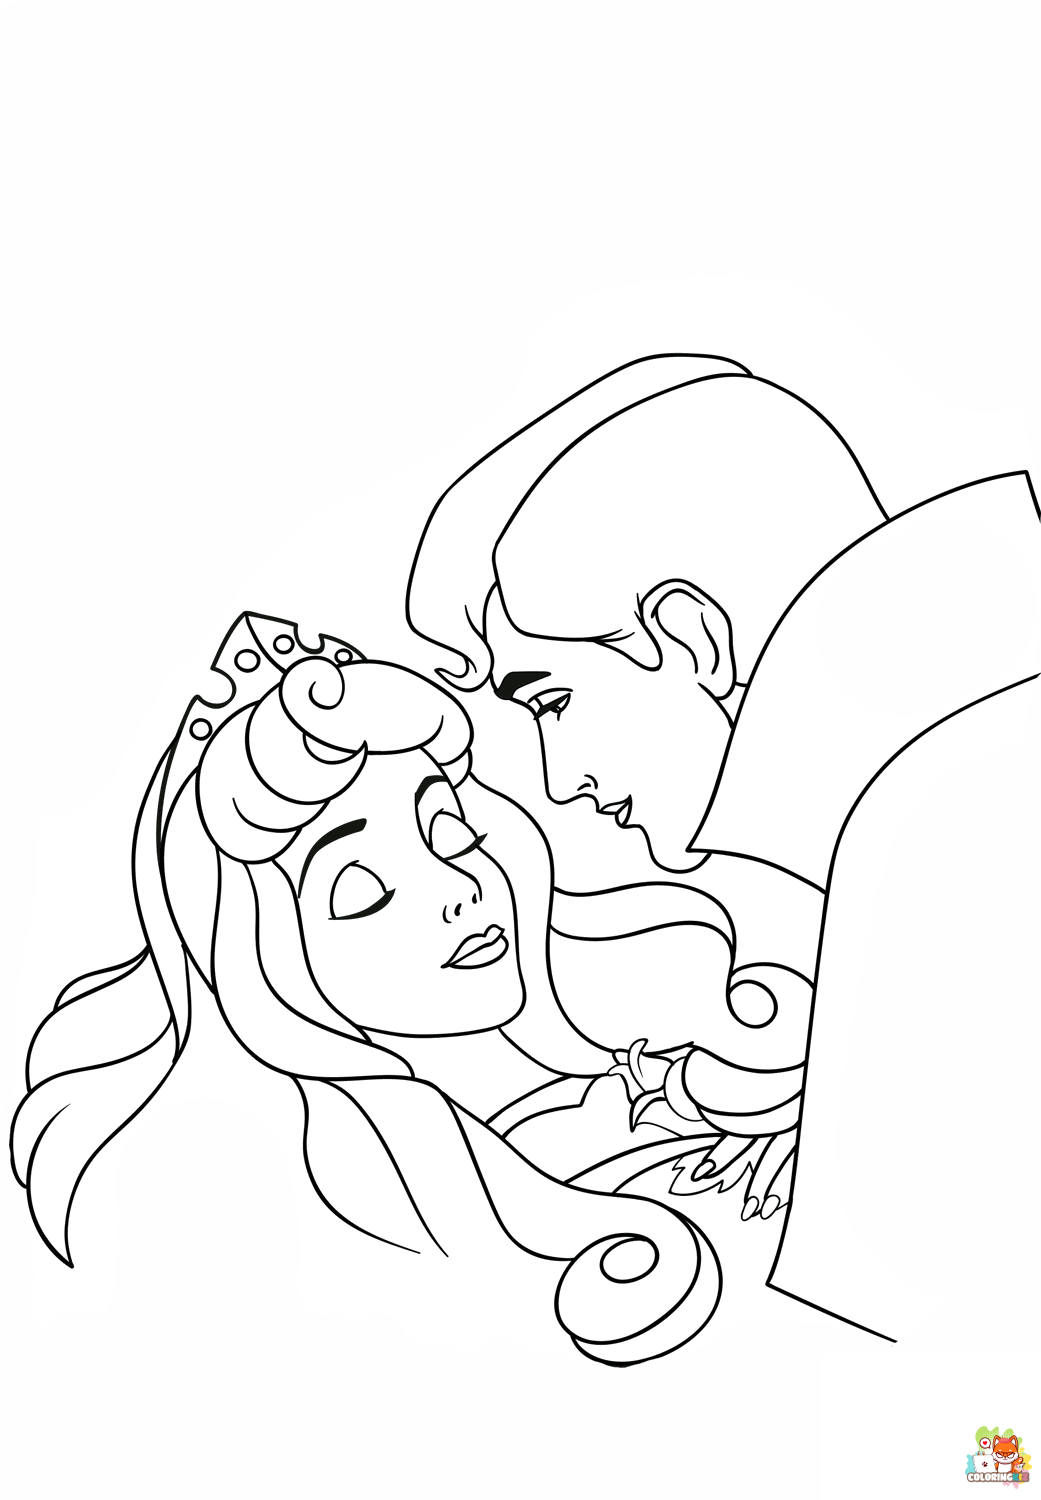 Phillip and Aurora coloring pages 2